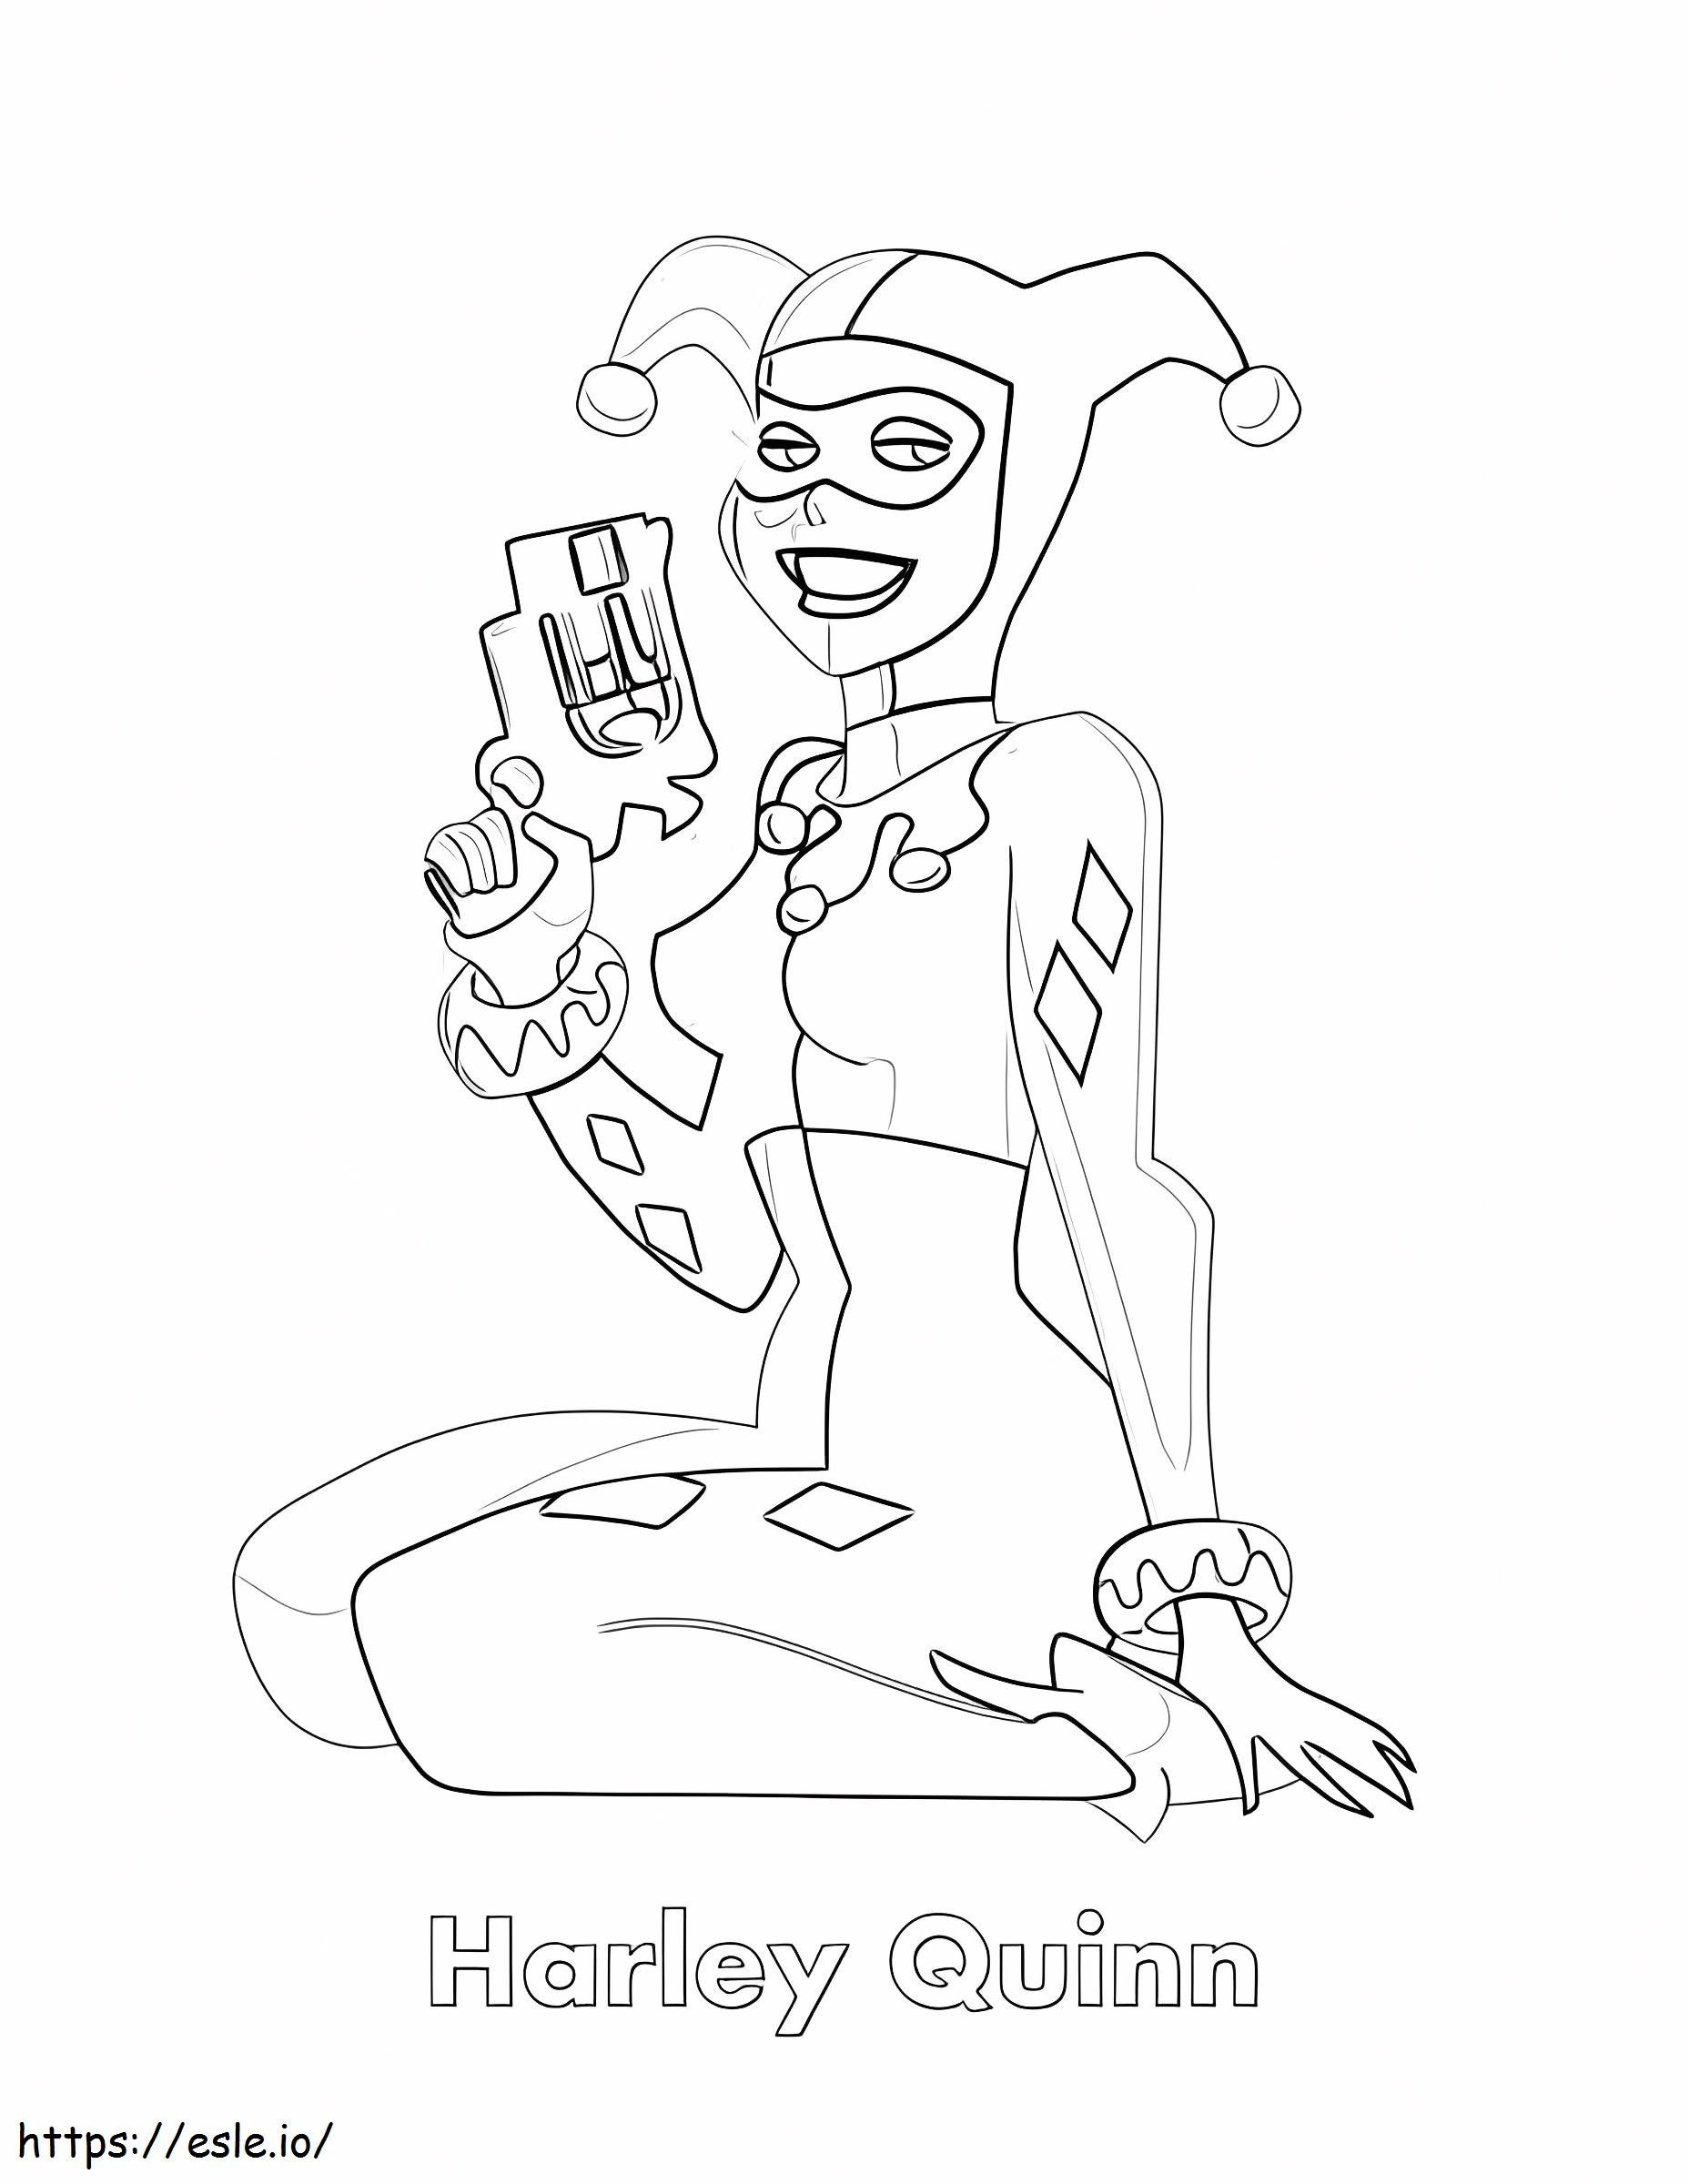 Harley Quinn With Gun coloring page